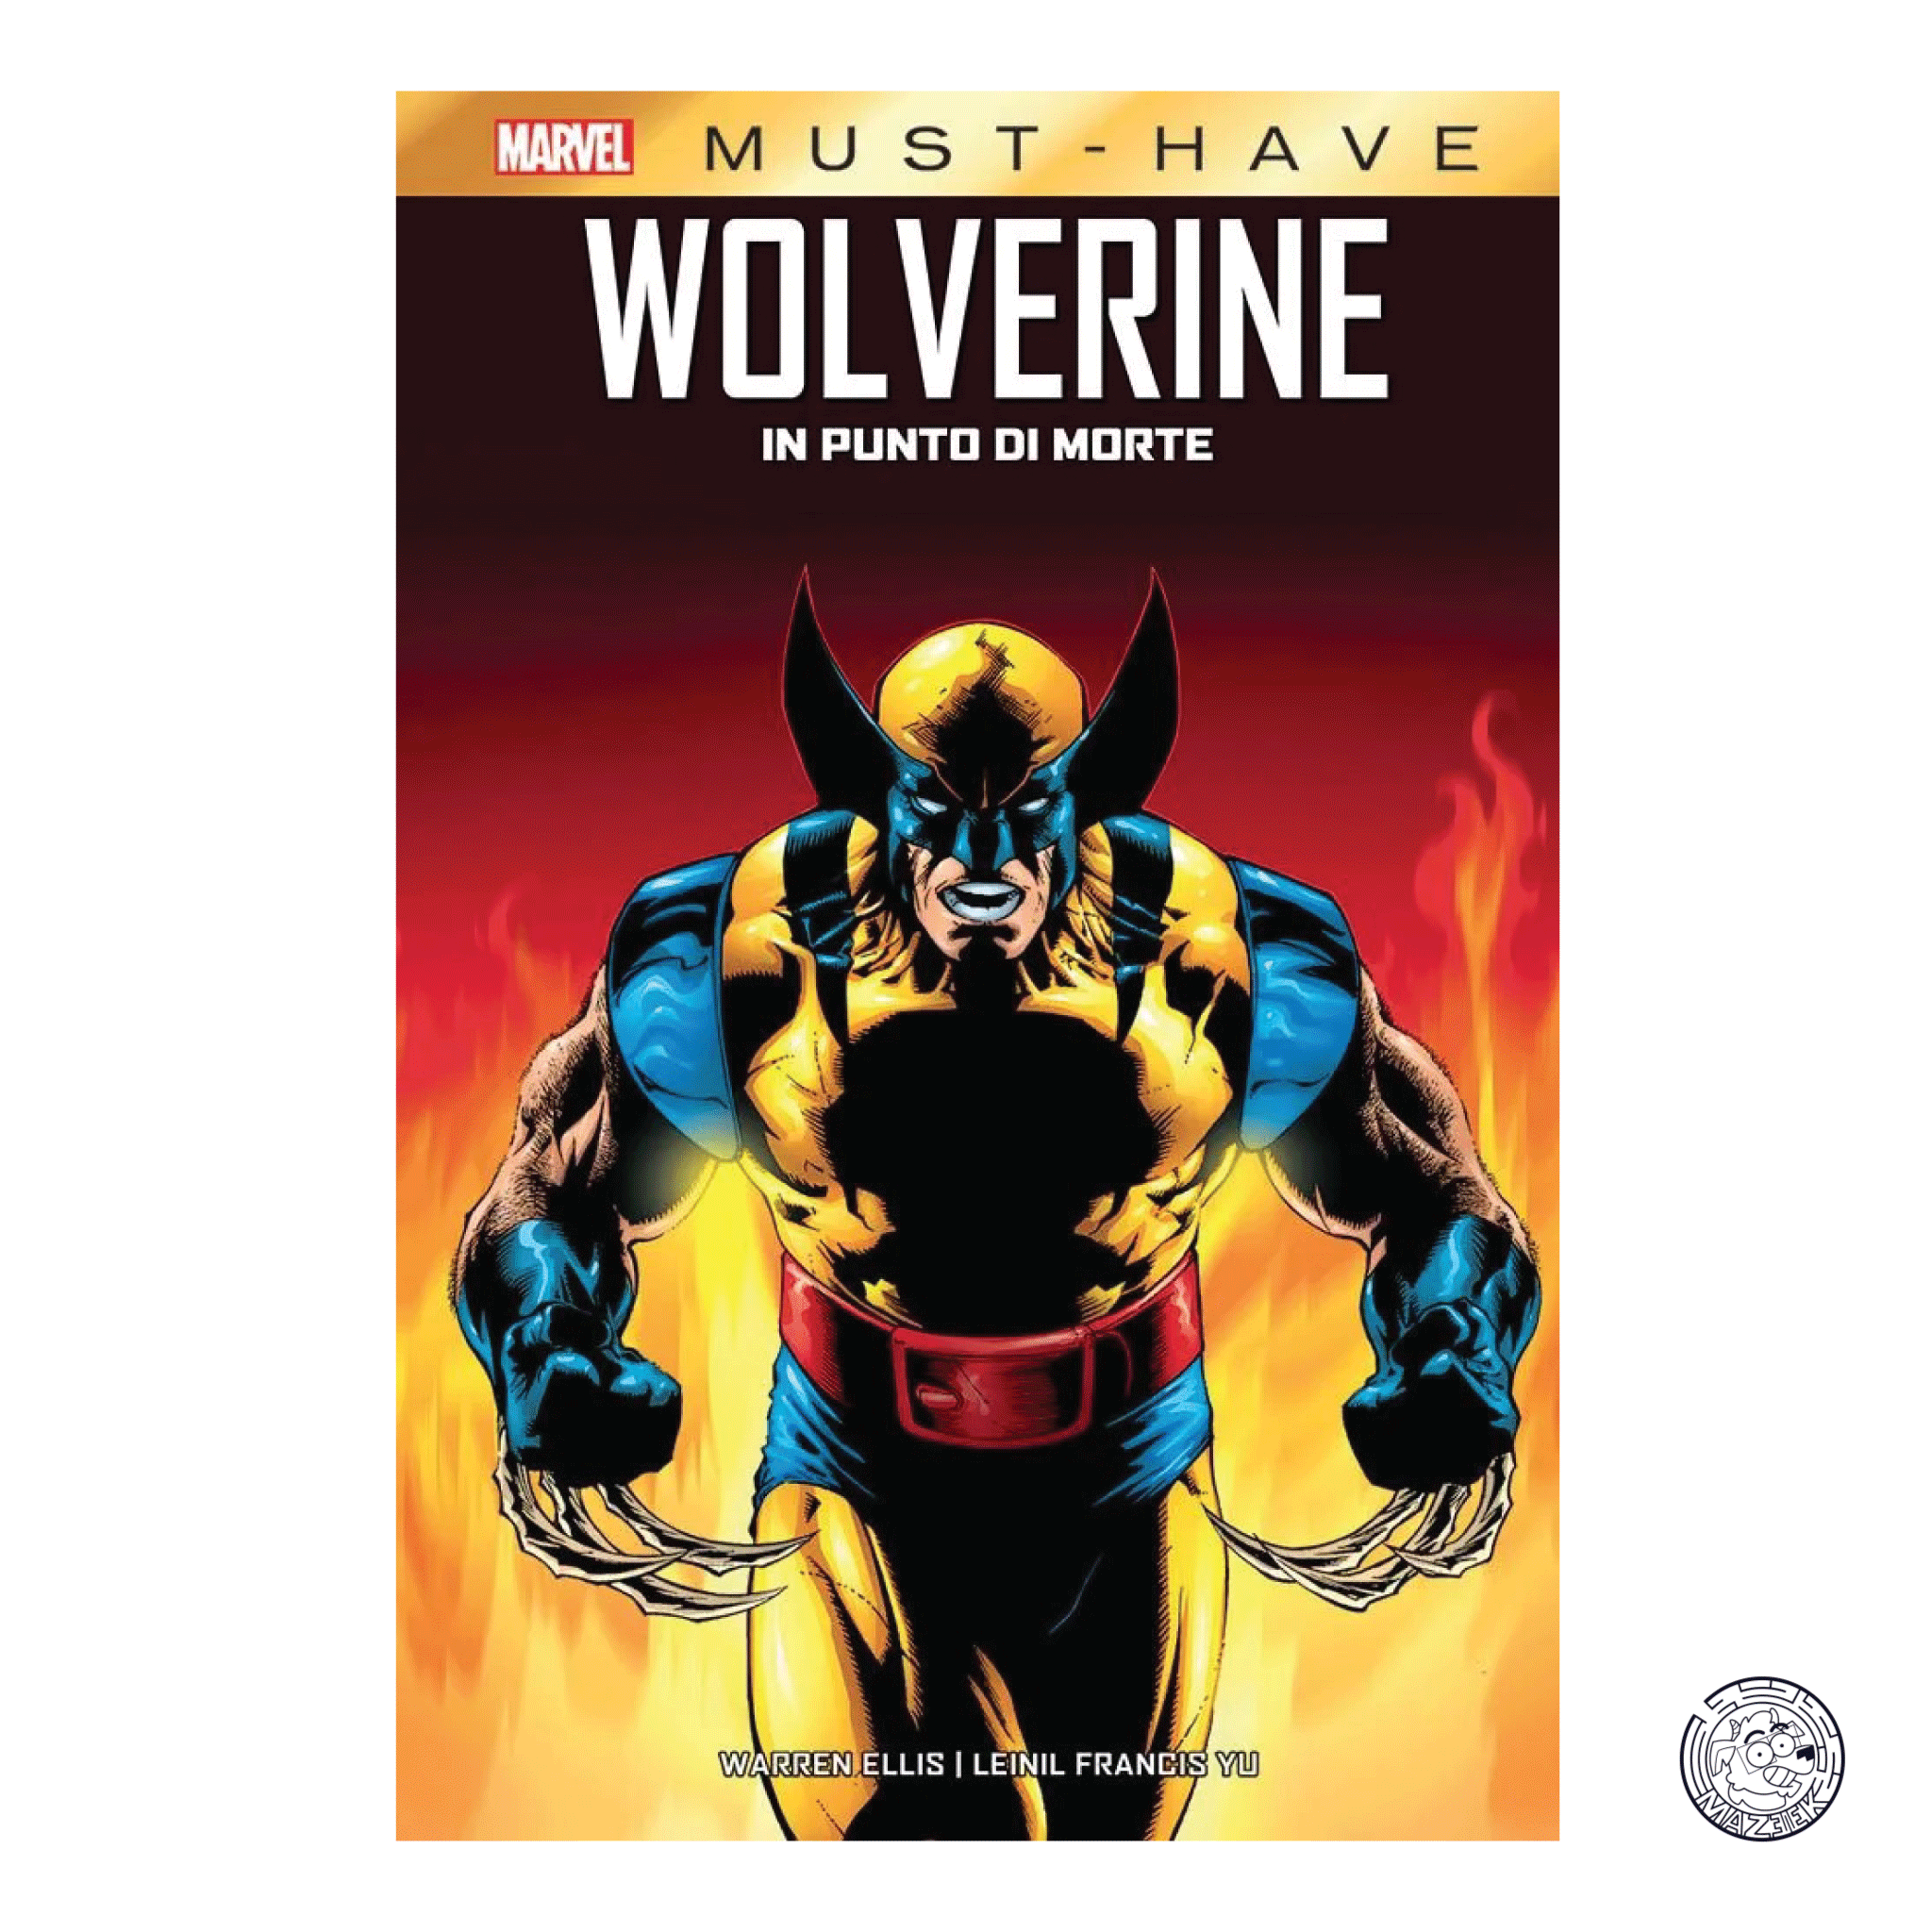 Marvel Must Have - Wolverine: Weapon X